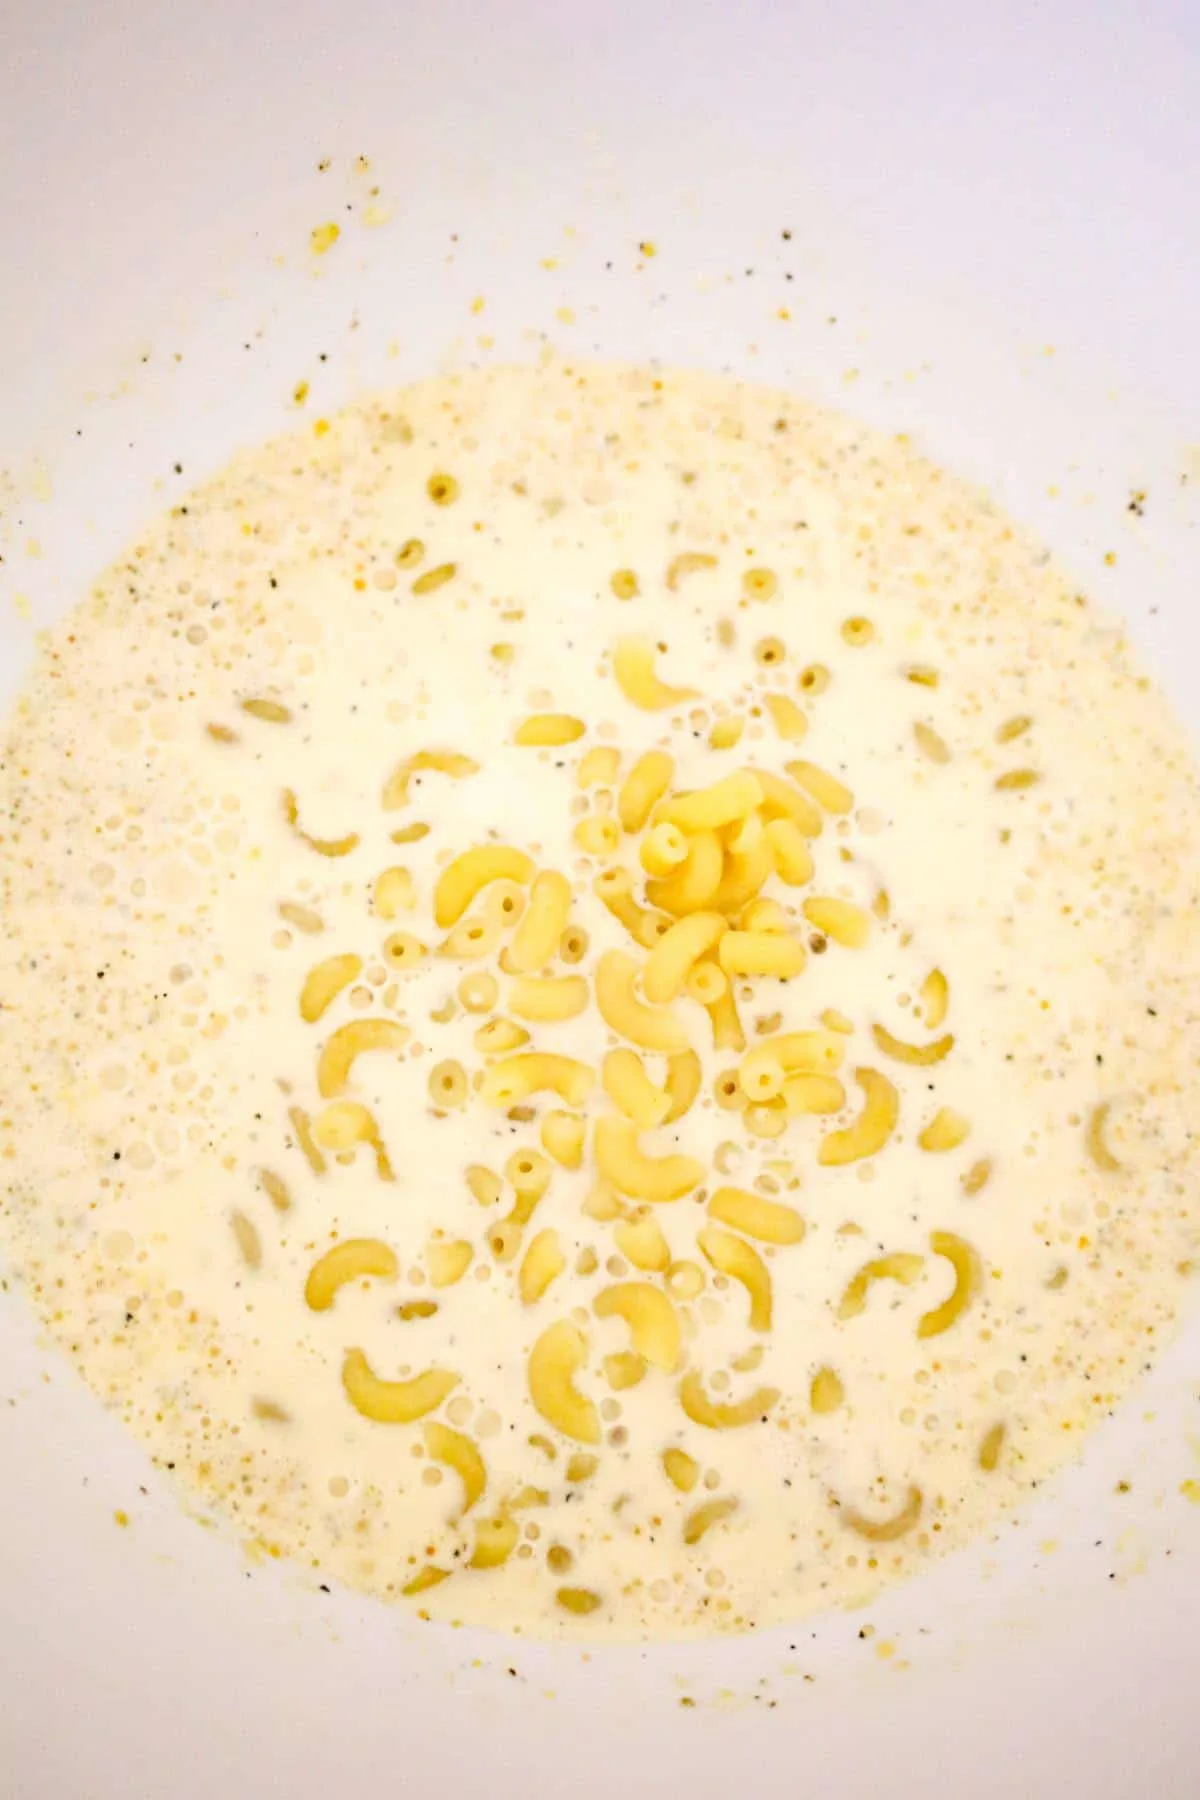 cooked macaroni noodles added to heavy cream and evaporated milk mixture in a mixing bowl